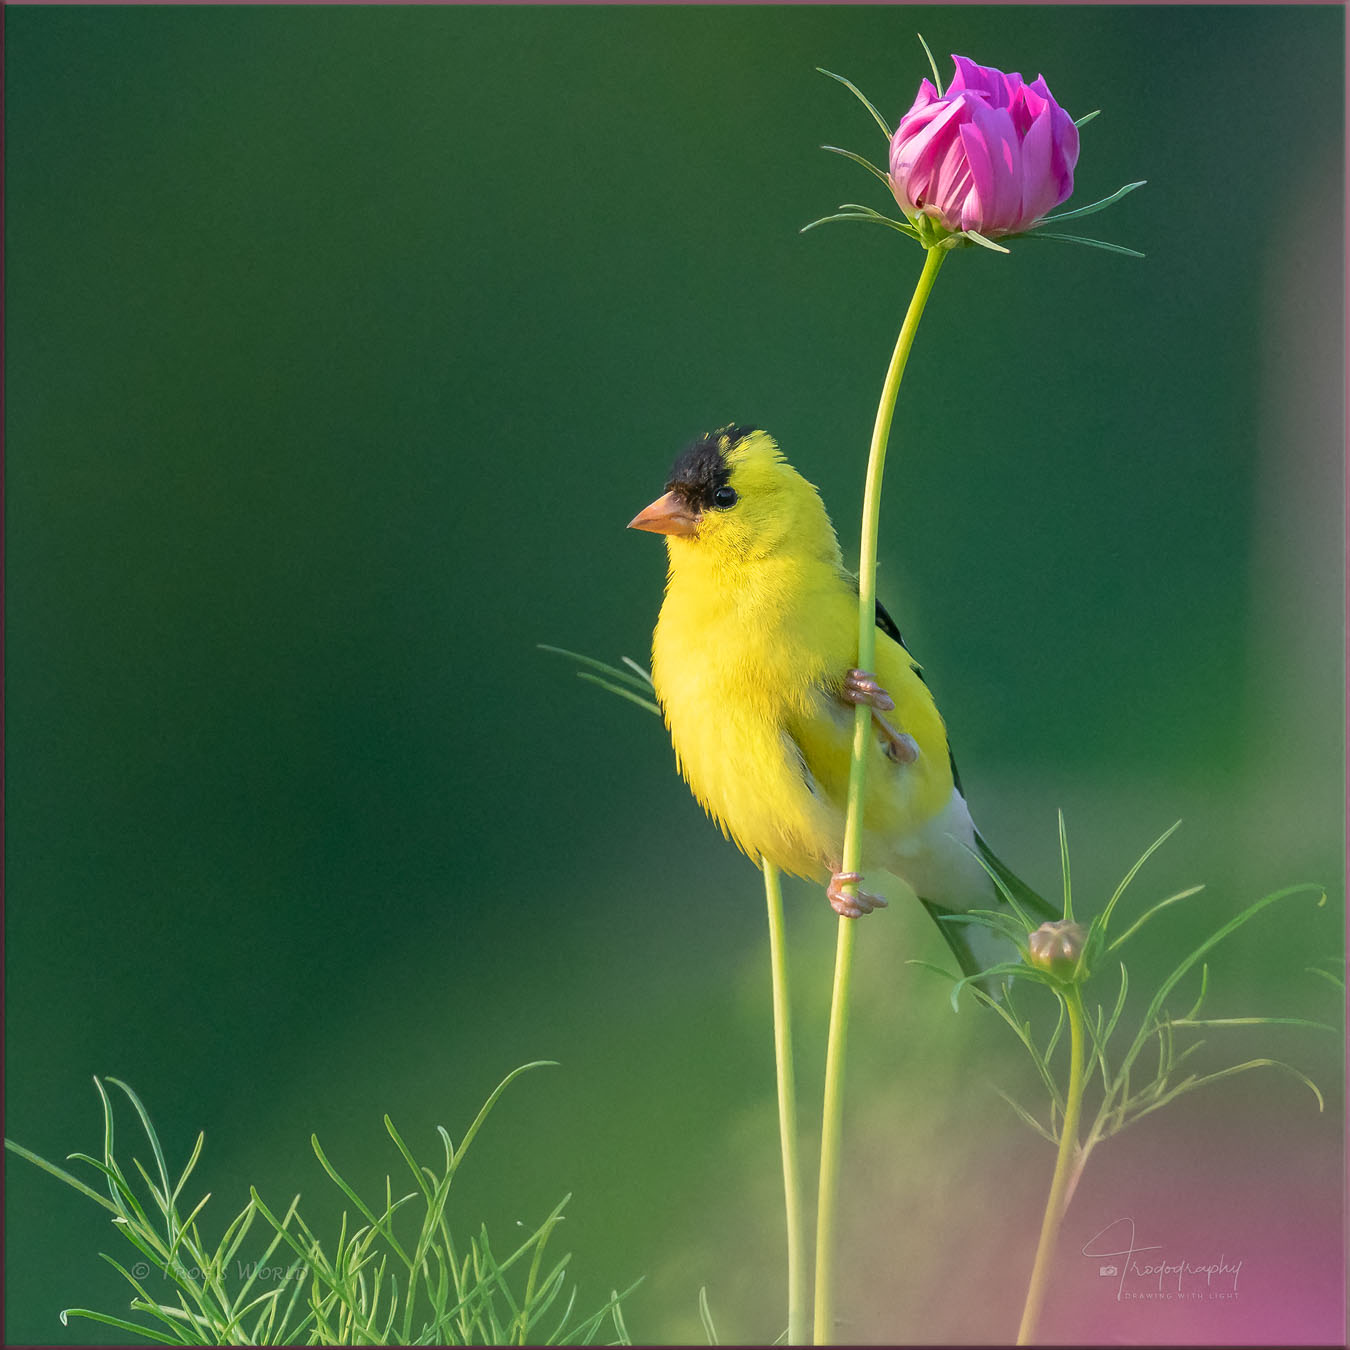 American Goldfinch on a flower